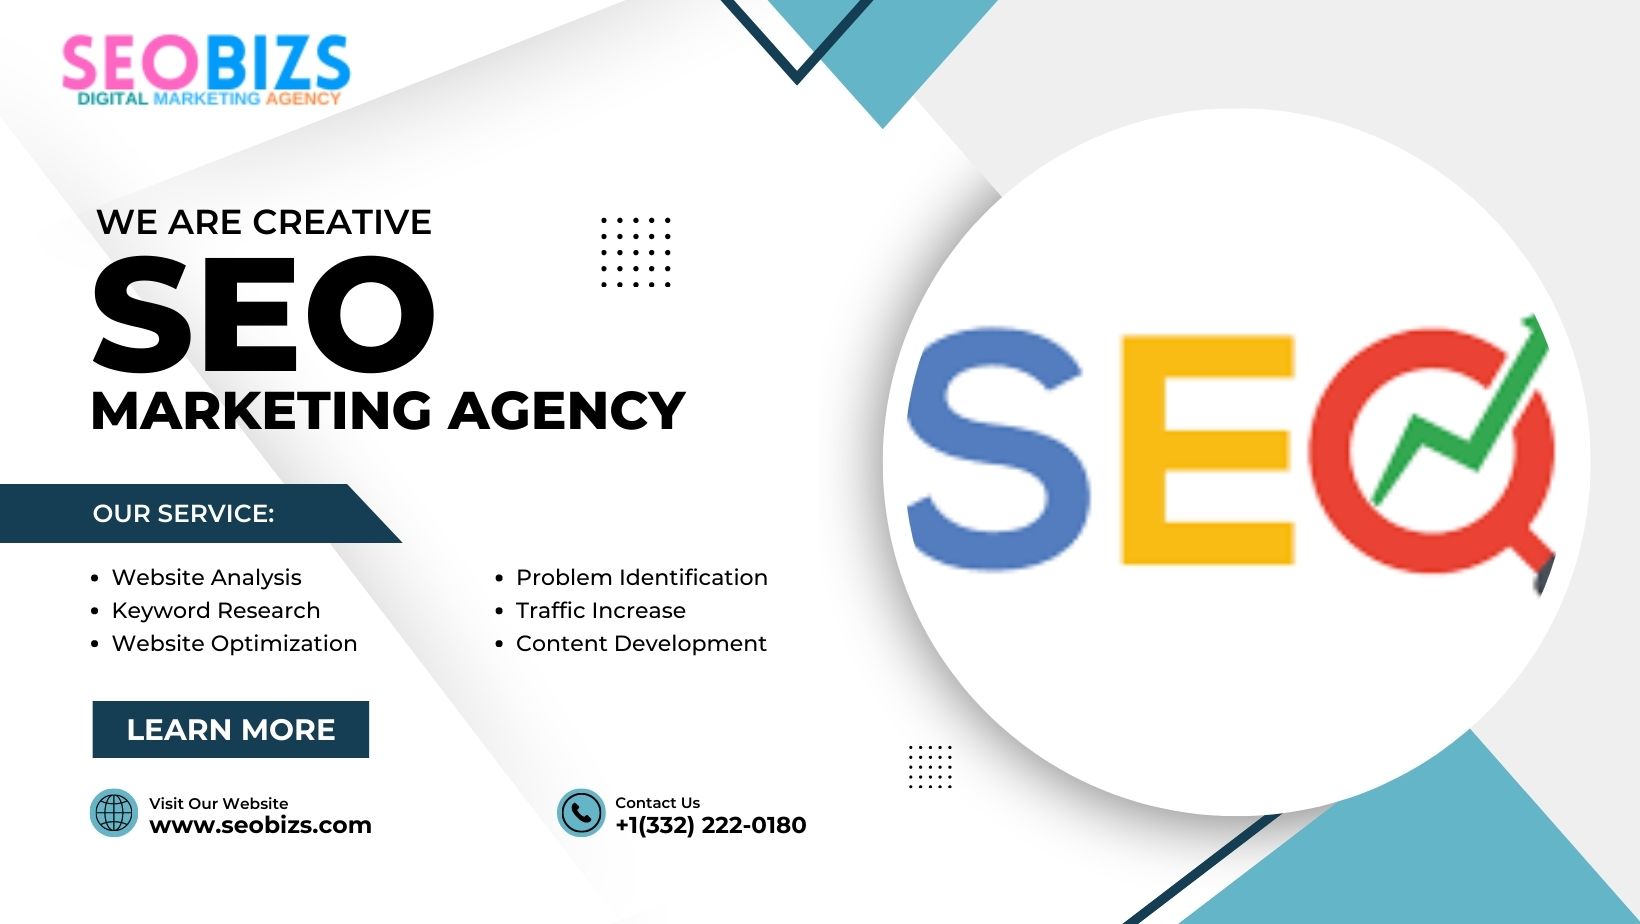 seobizs is a 100% authentic & genuine SEO company offering highly reliable search engine optimisation services in USA. We are committed to delivering exceptional results via quality search engine marketing solutions at affordable prices.